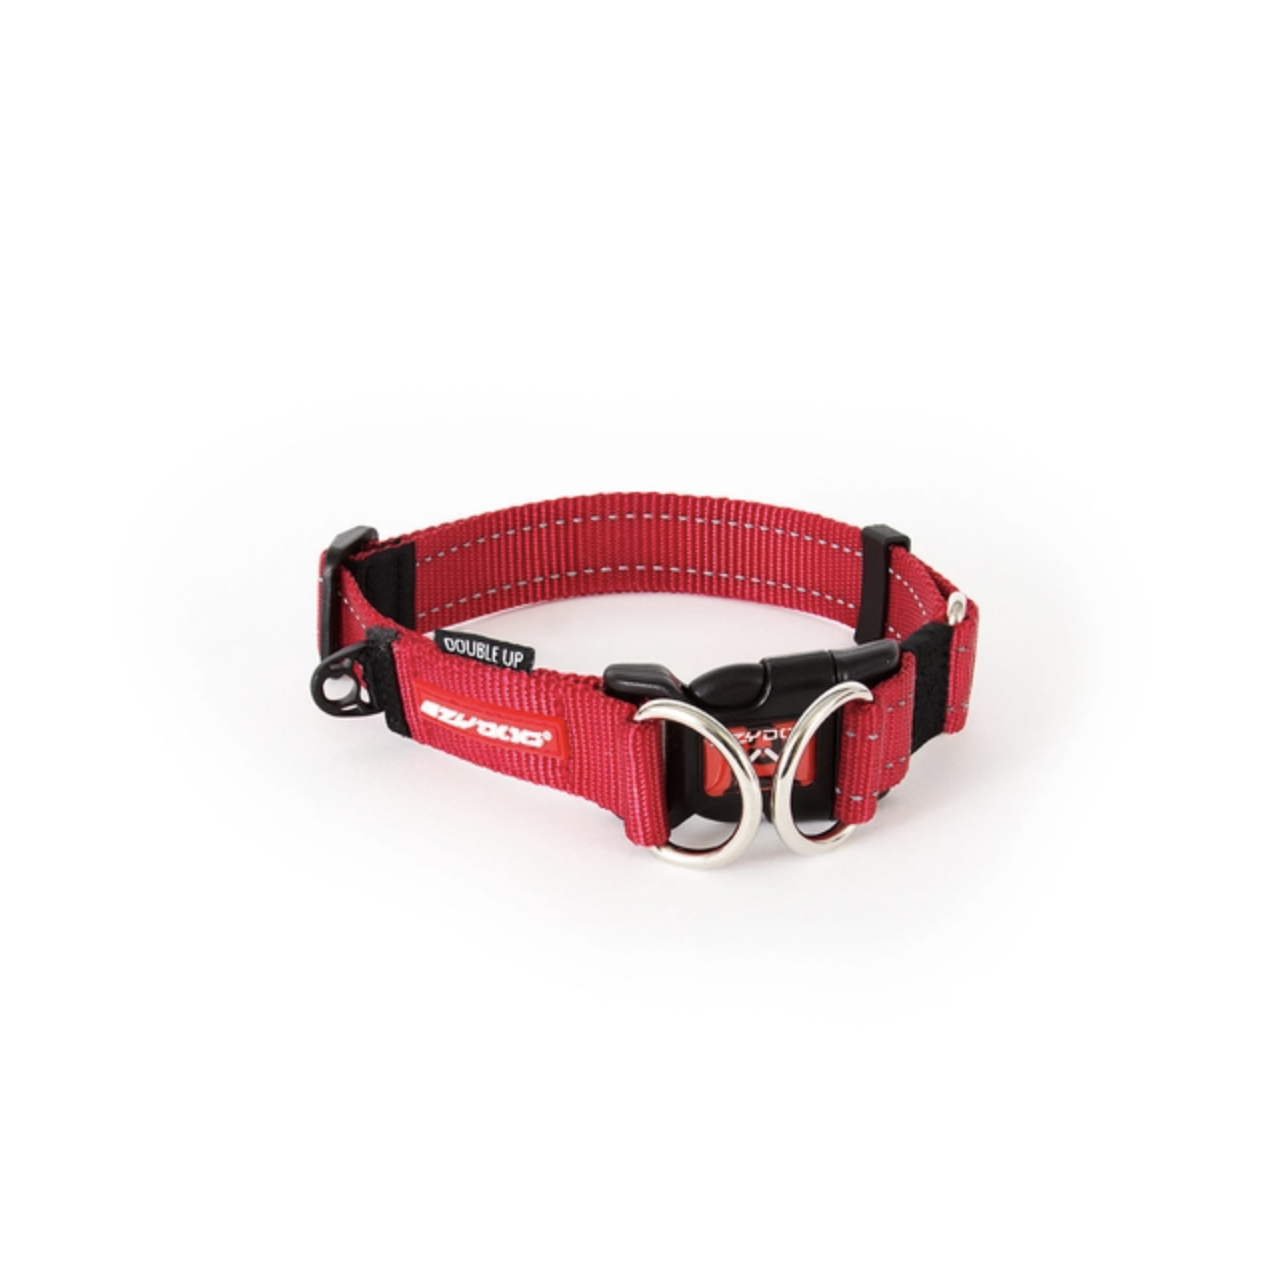 EzyDog Double Up Collar - Red SMALL